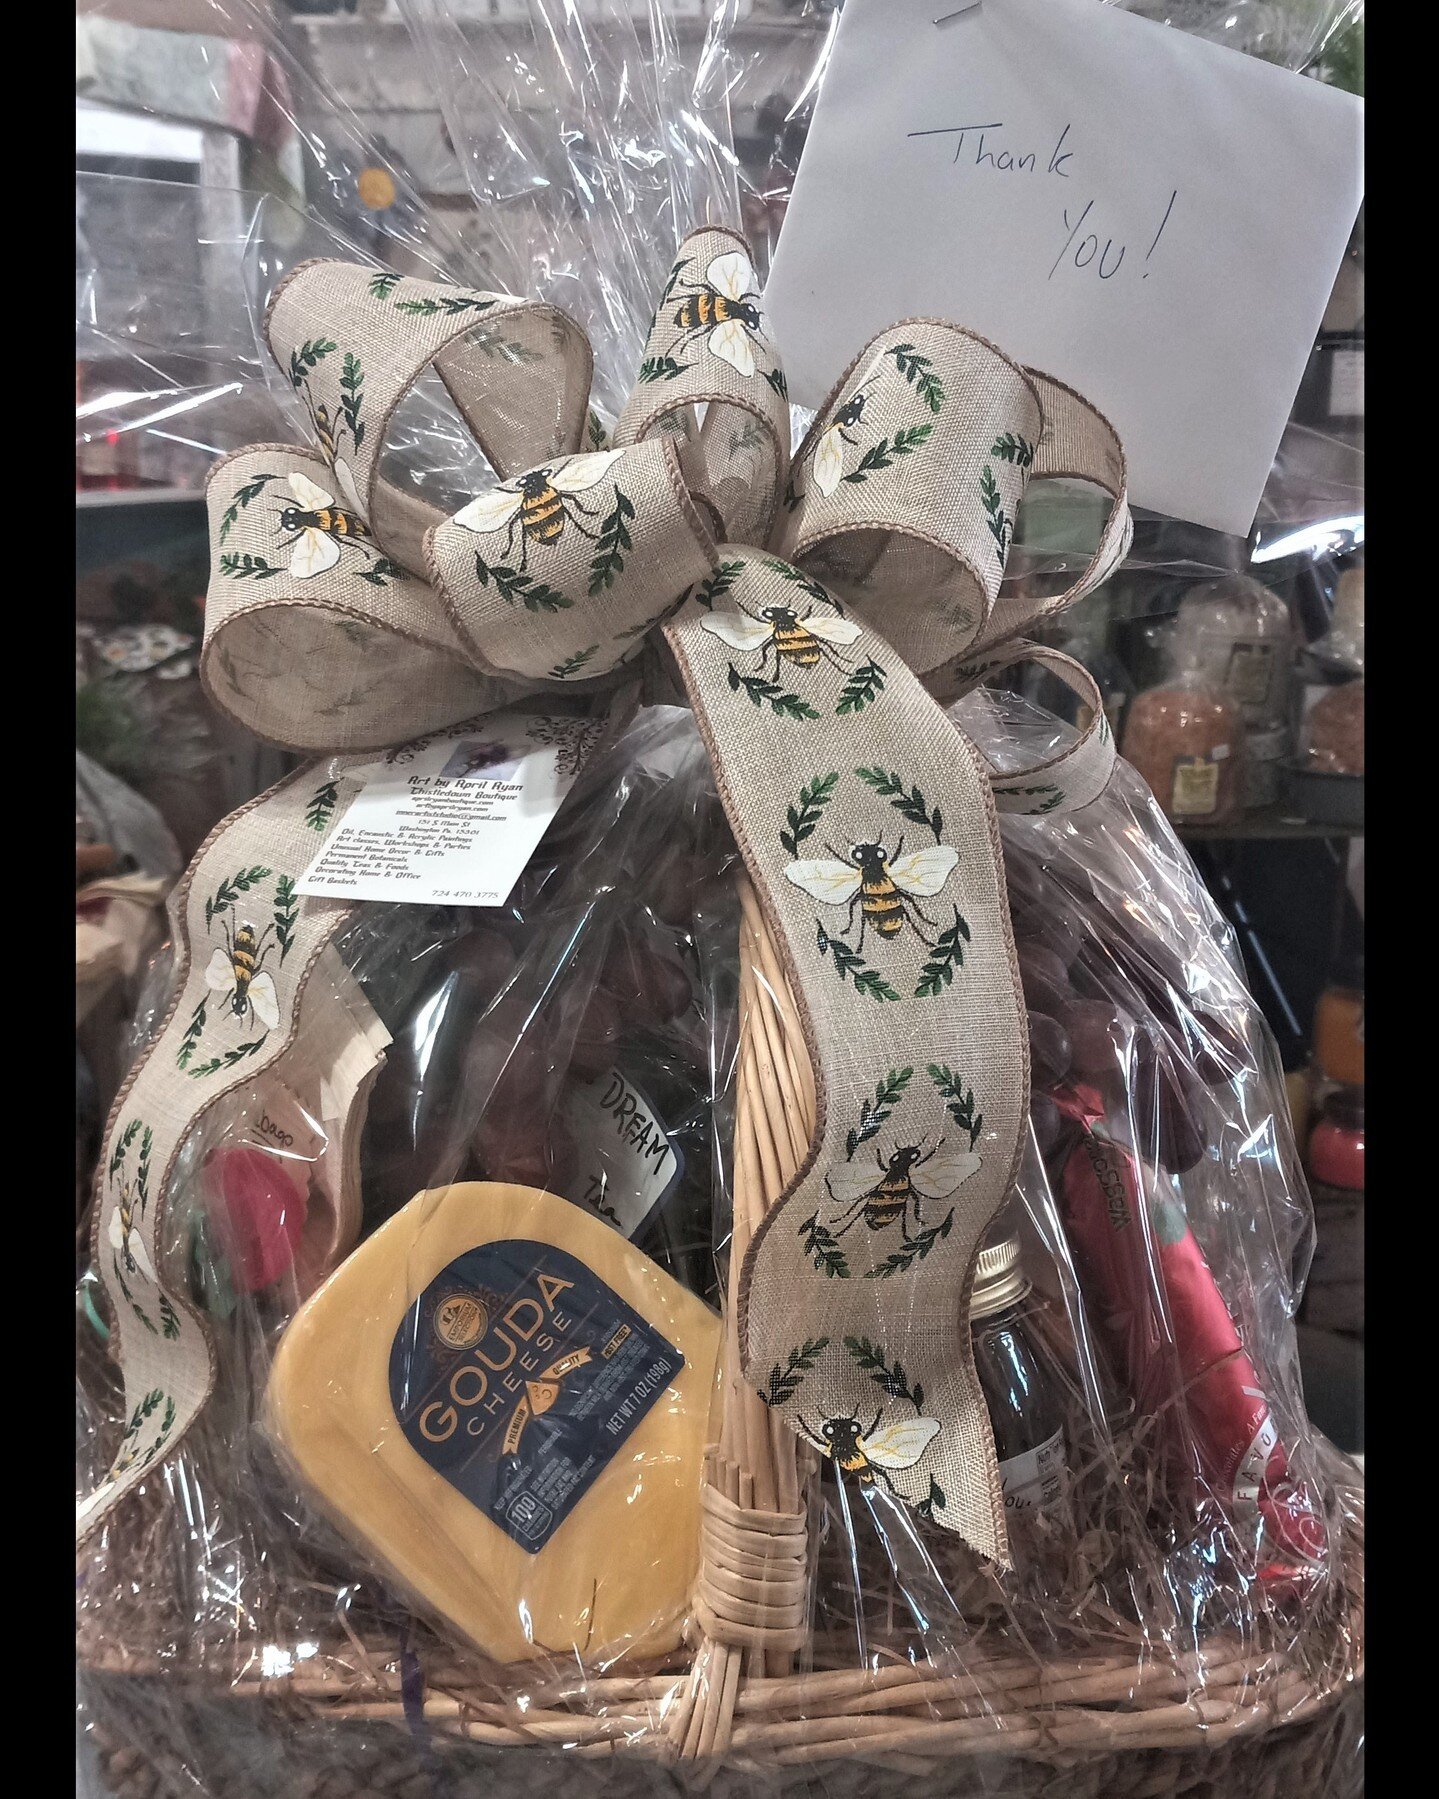 Taking care of the technology needs of small businesses is Tech by Dale's passion.  So too is supporting local businesses and organizations in the Washington, PA area.

I enjoy sending gift baskets from Art by April Ryan
​at Thistledown Boutique to t